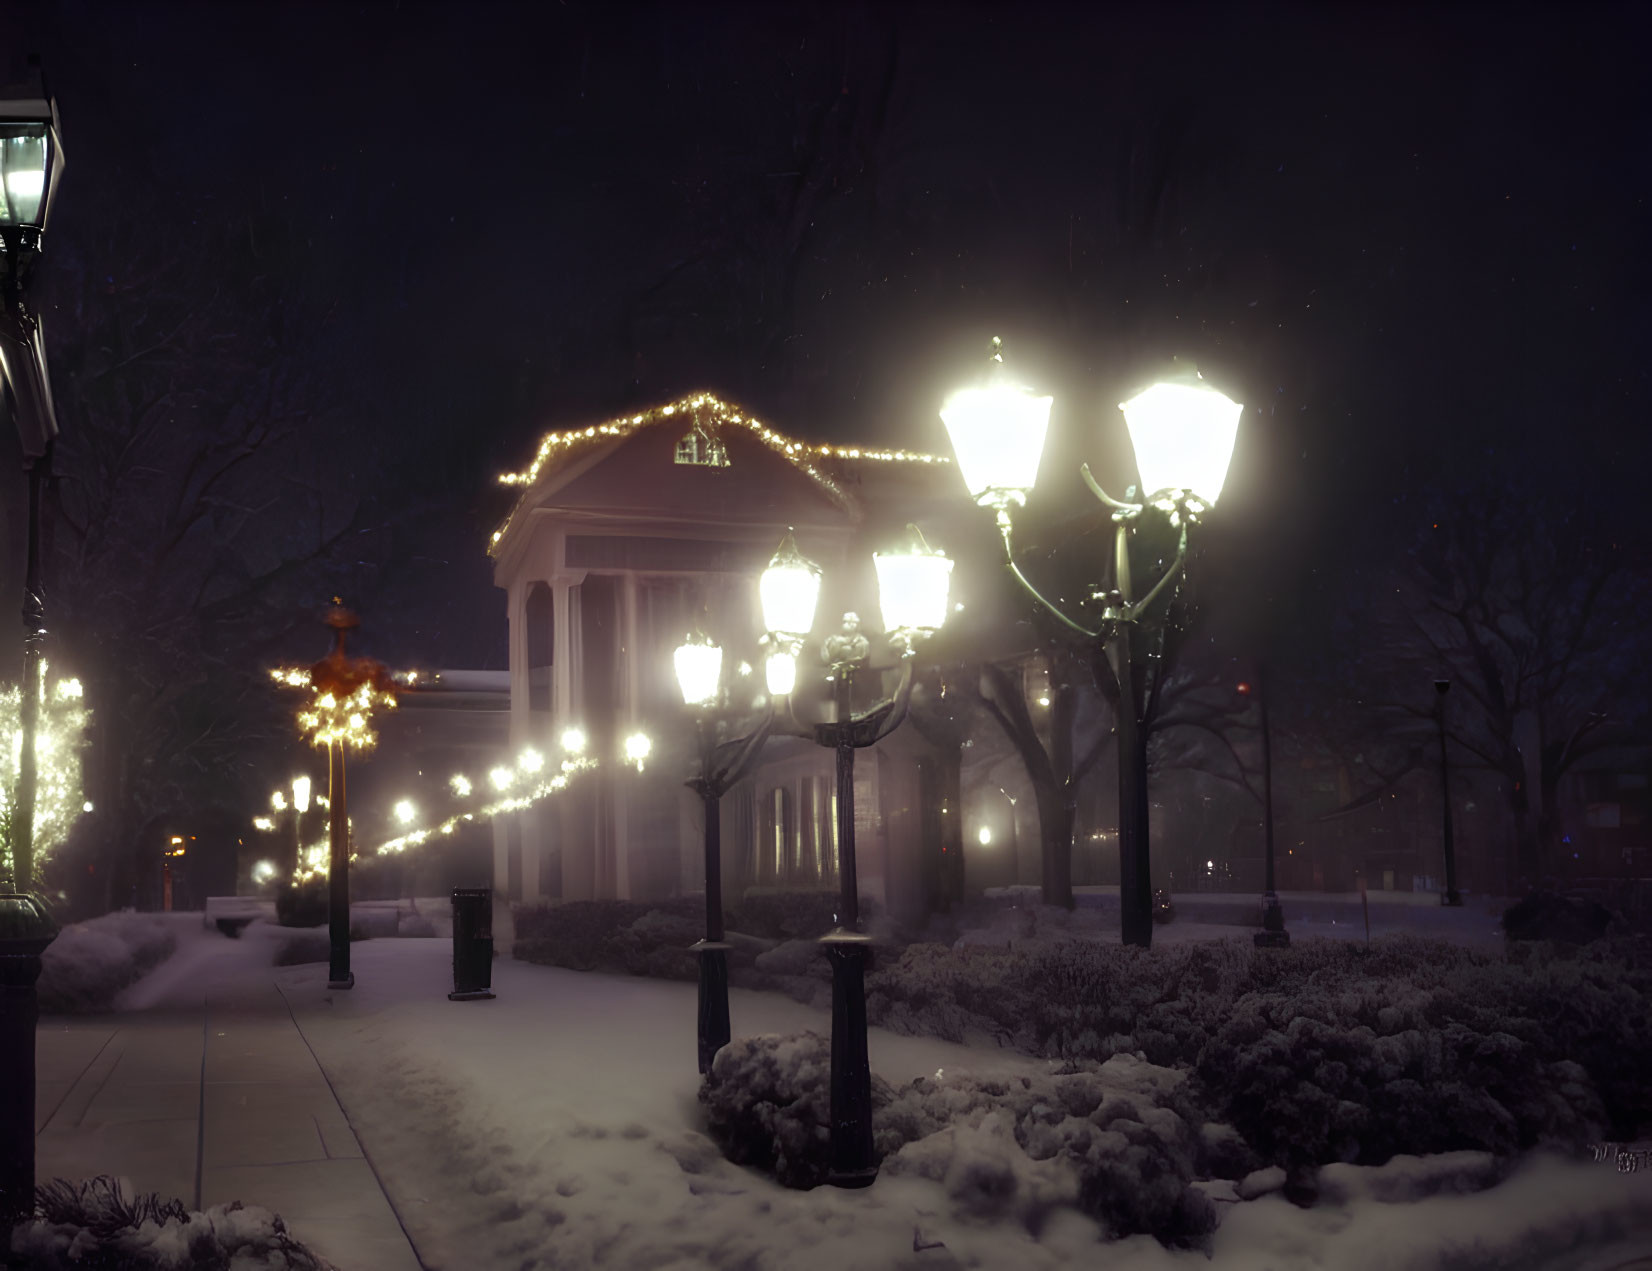 Snowy Winter Dusk Scene with Decorated Lamp Posts